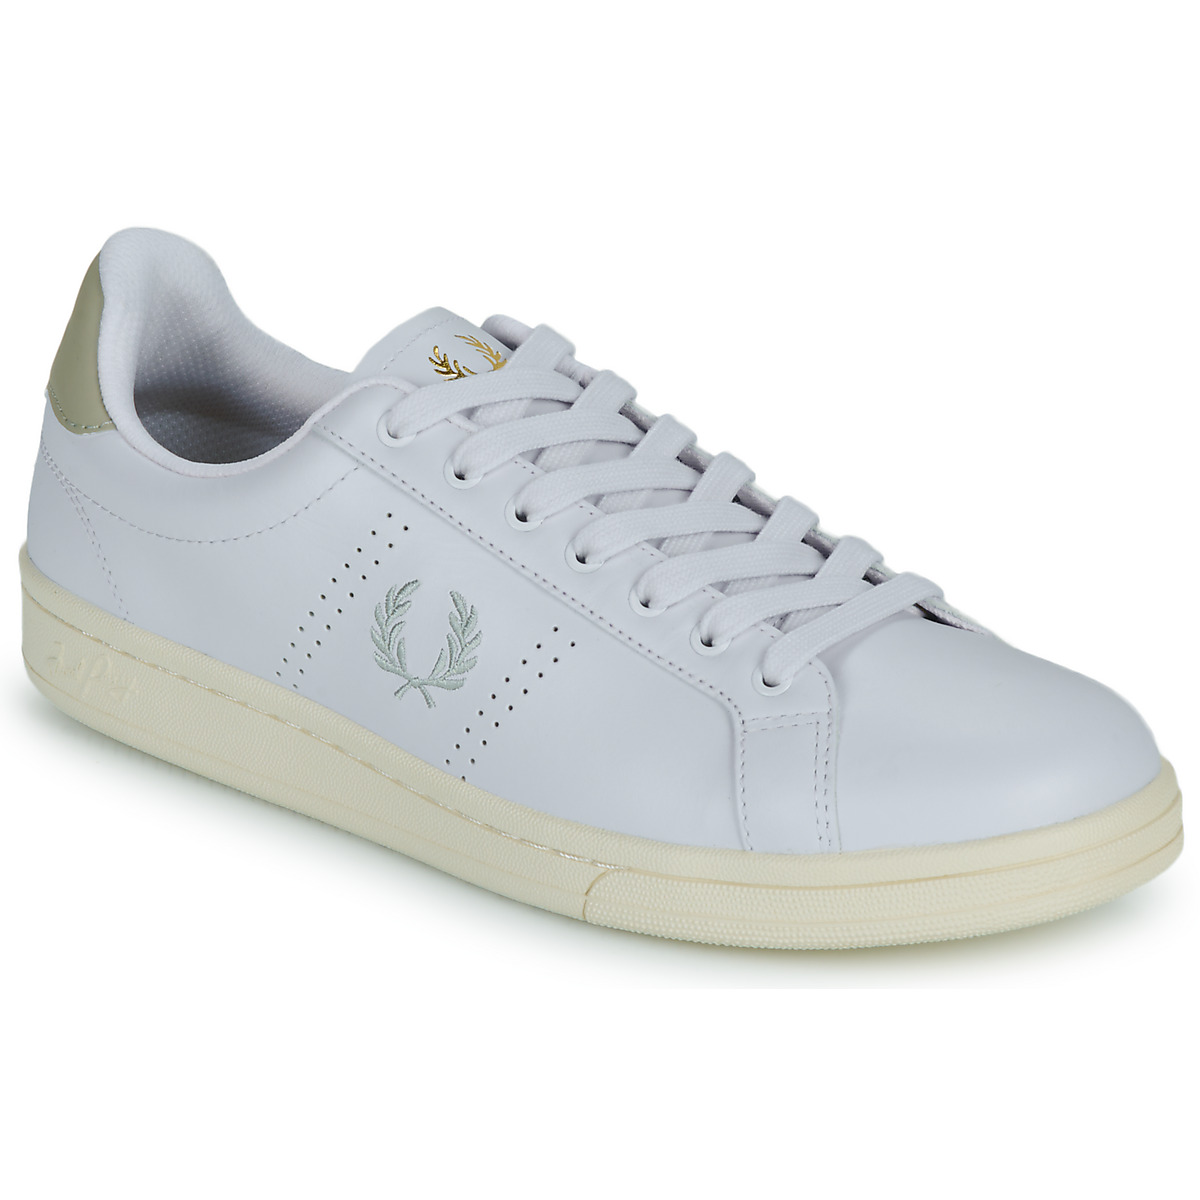 Xαμηλά Sneakers Fred Perry B721 LEATHER